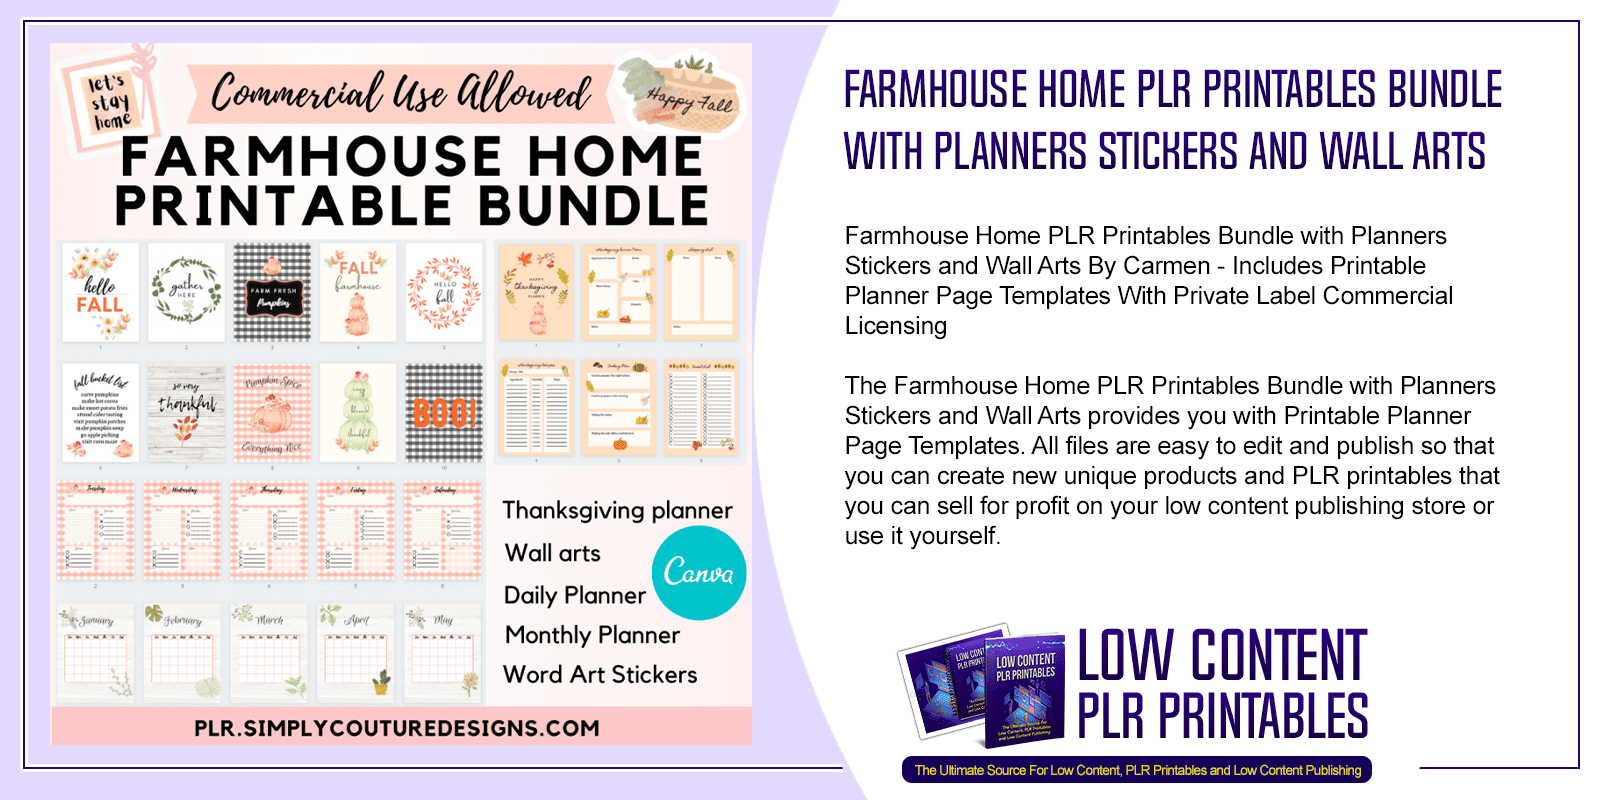 Farmhouse Home PLR Printables Bundle with Planners Stickers and Wall Arts